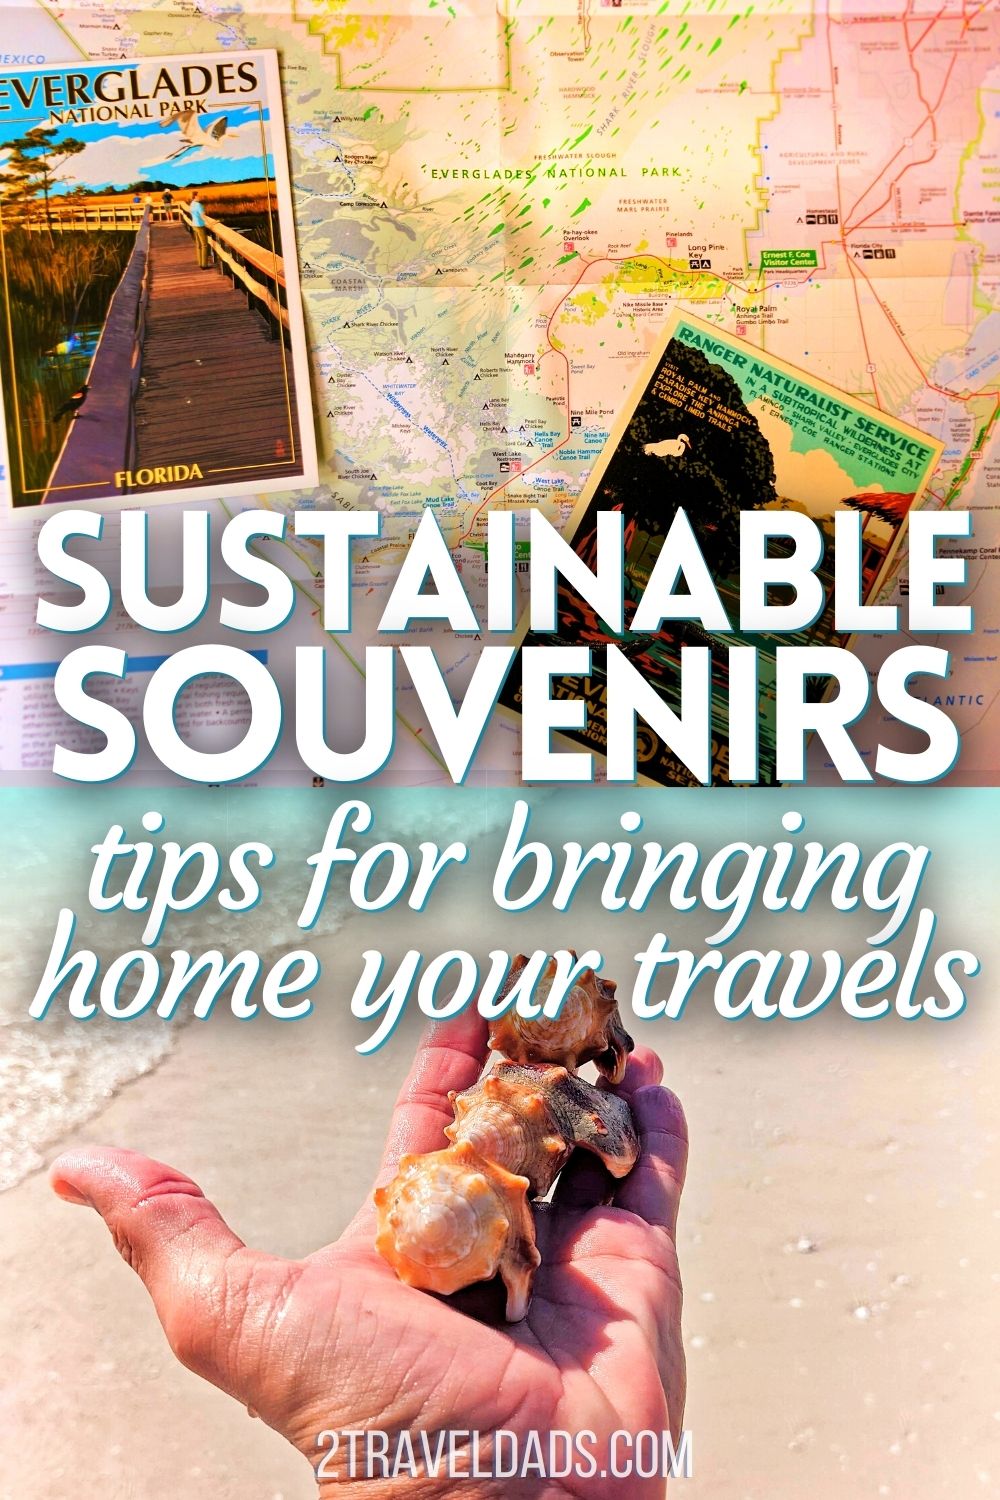 Sustainable souvenirs are not hard to find, but teaching yourself to opt for something low-impact and long lasting is a learned behavior. This tips will help you find and bring home meaningful, sustainable keepsakes from your travels.